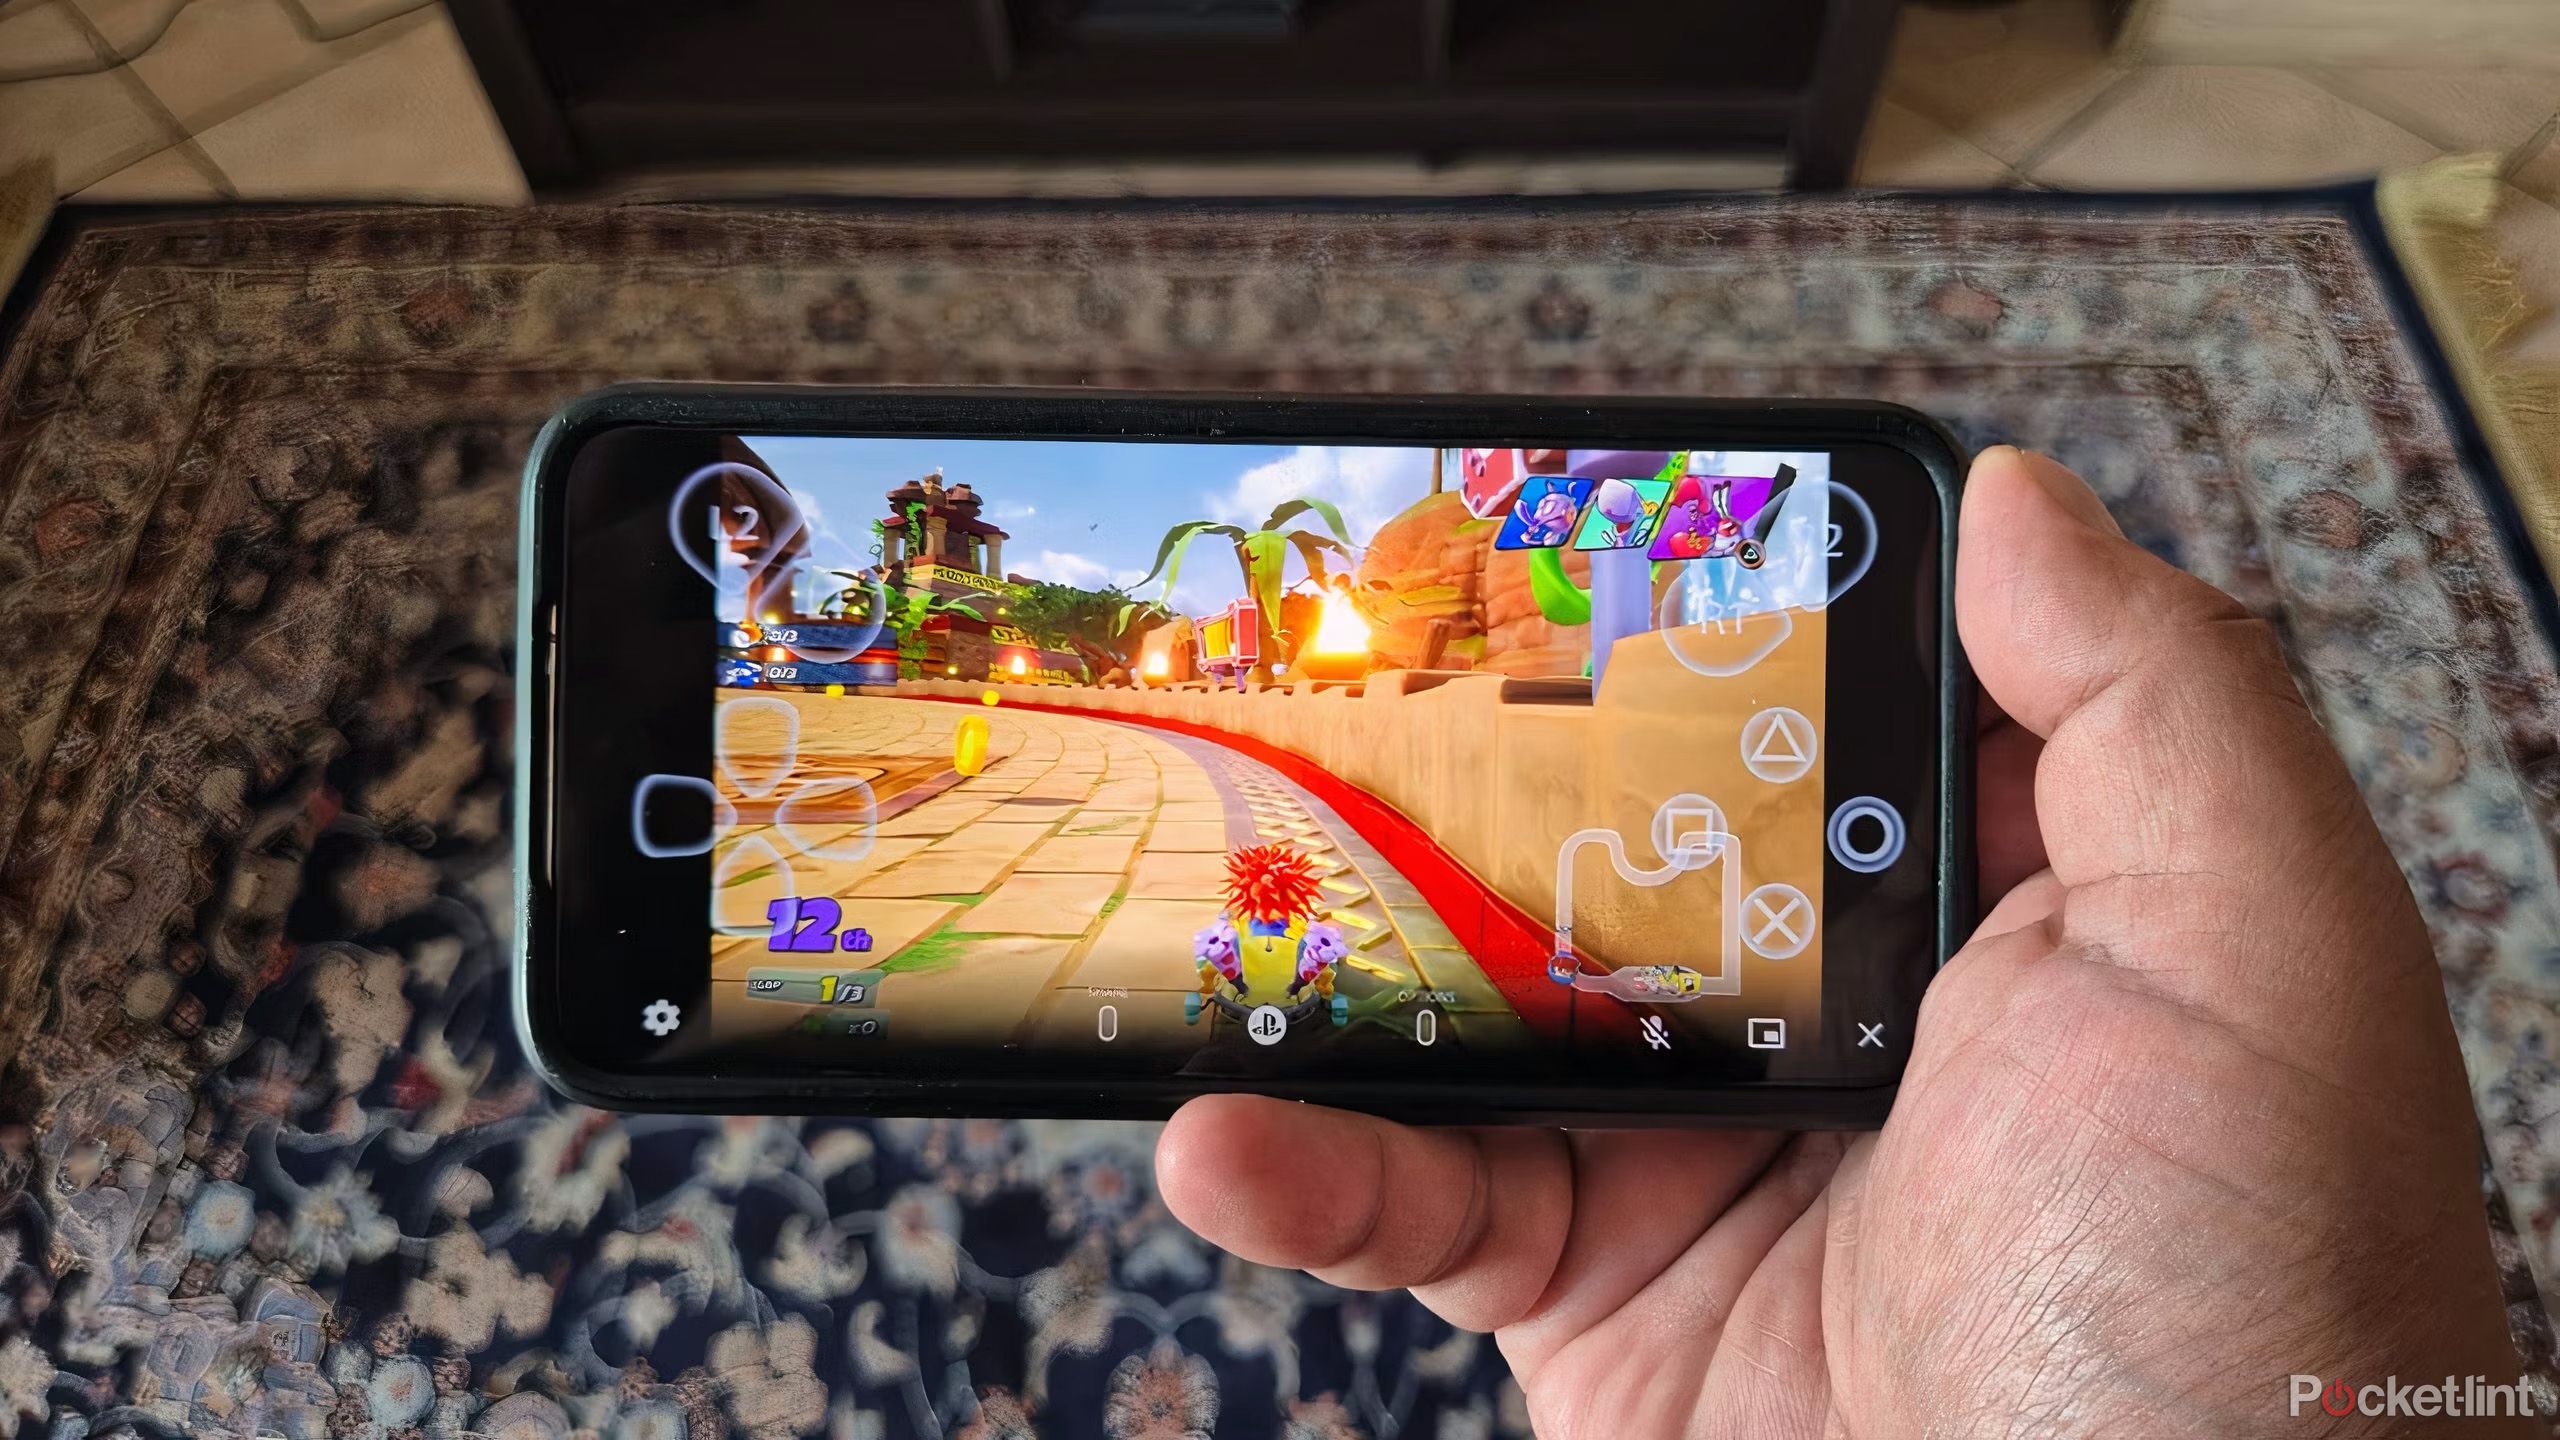 A game on an Android smartphone